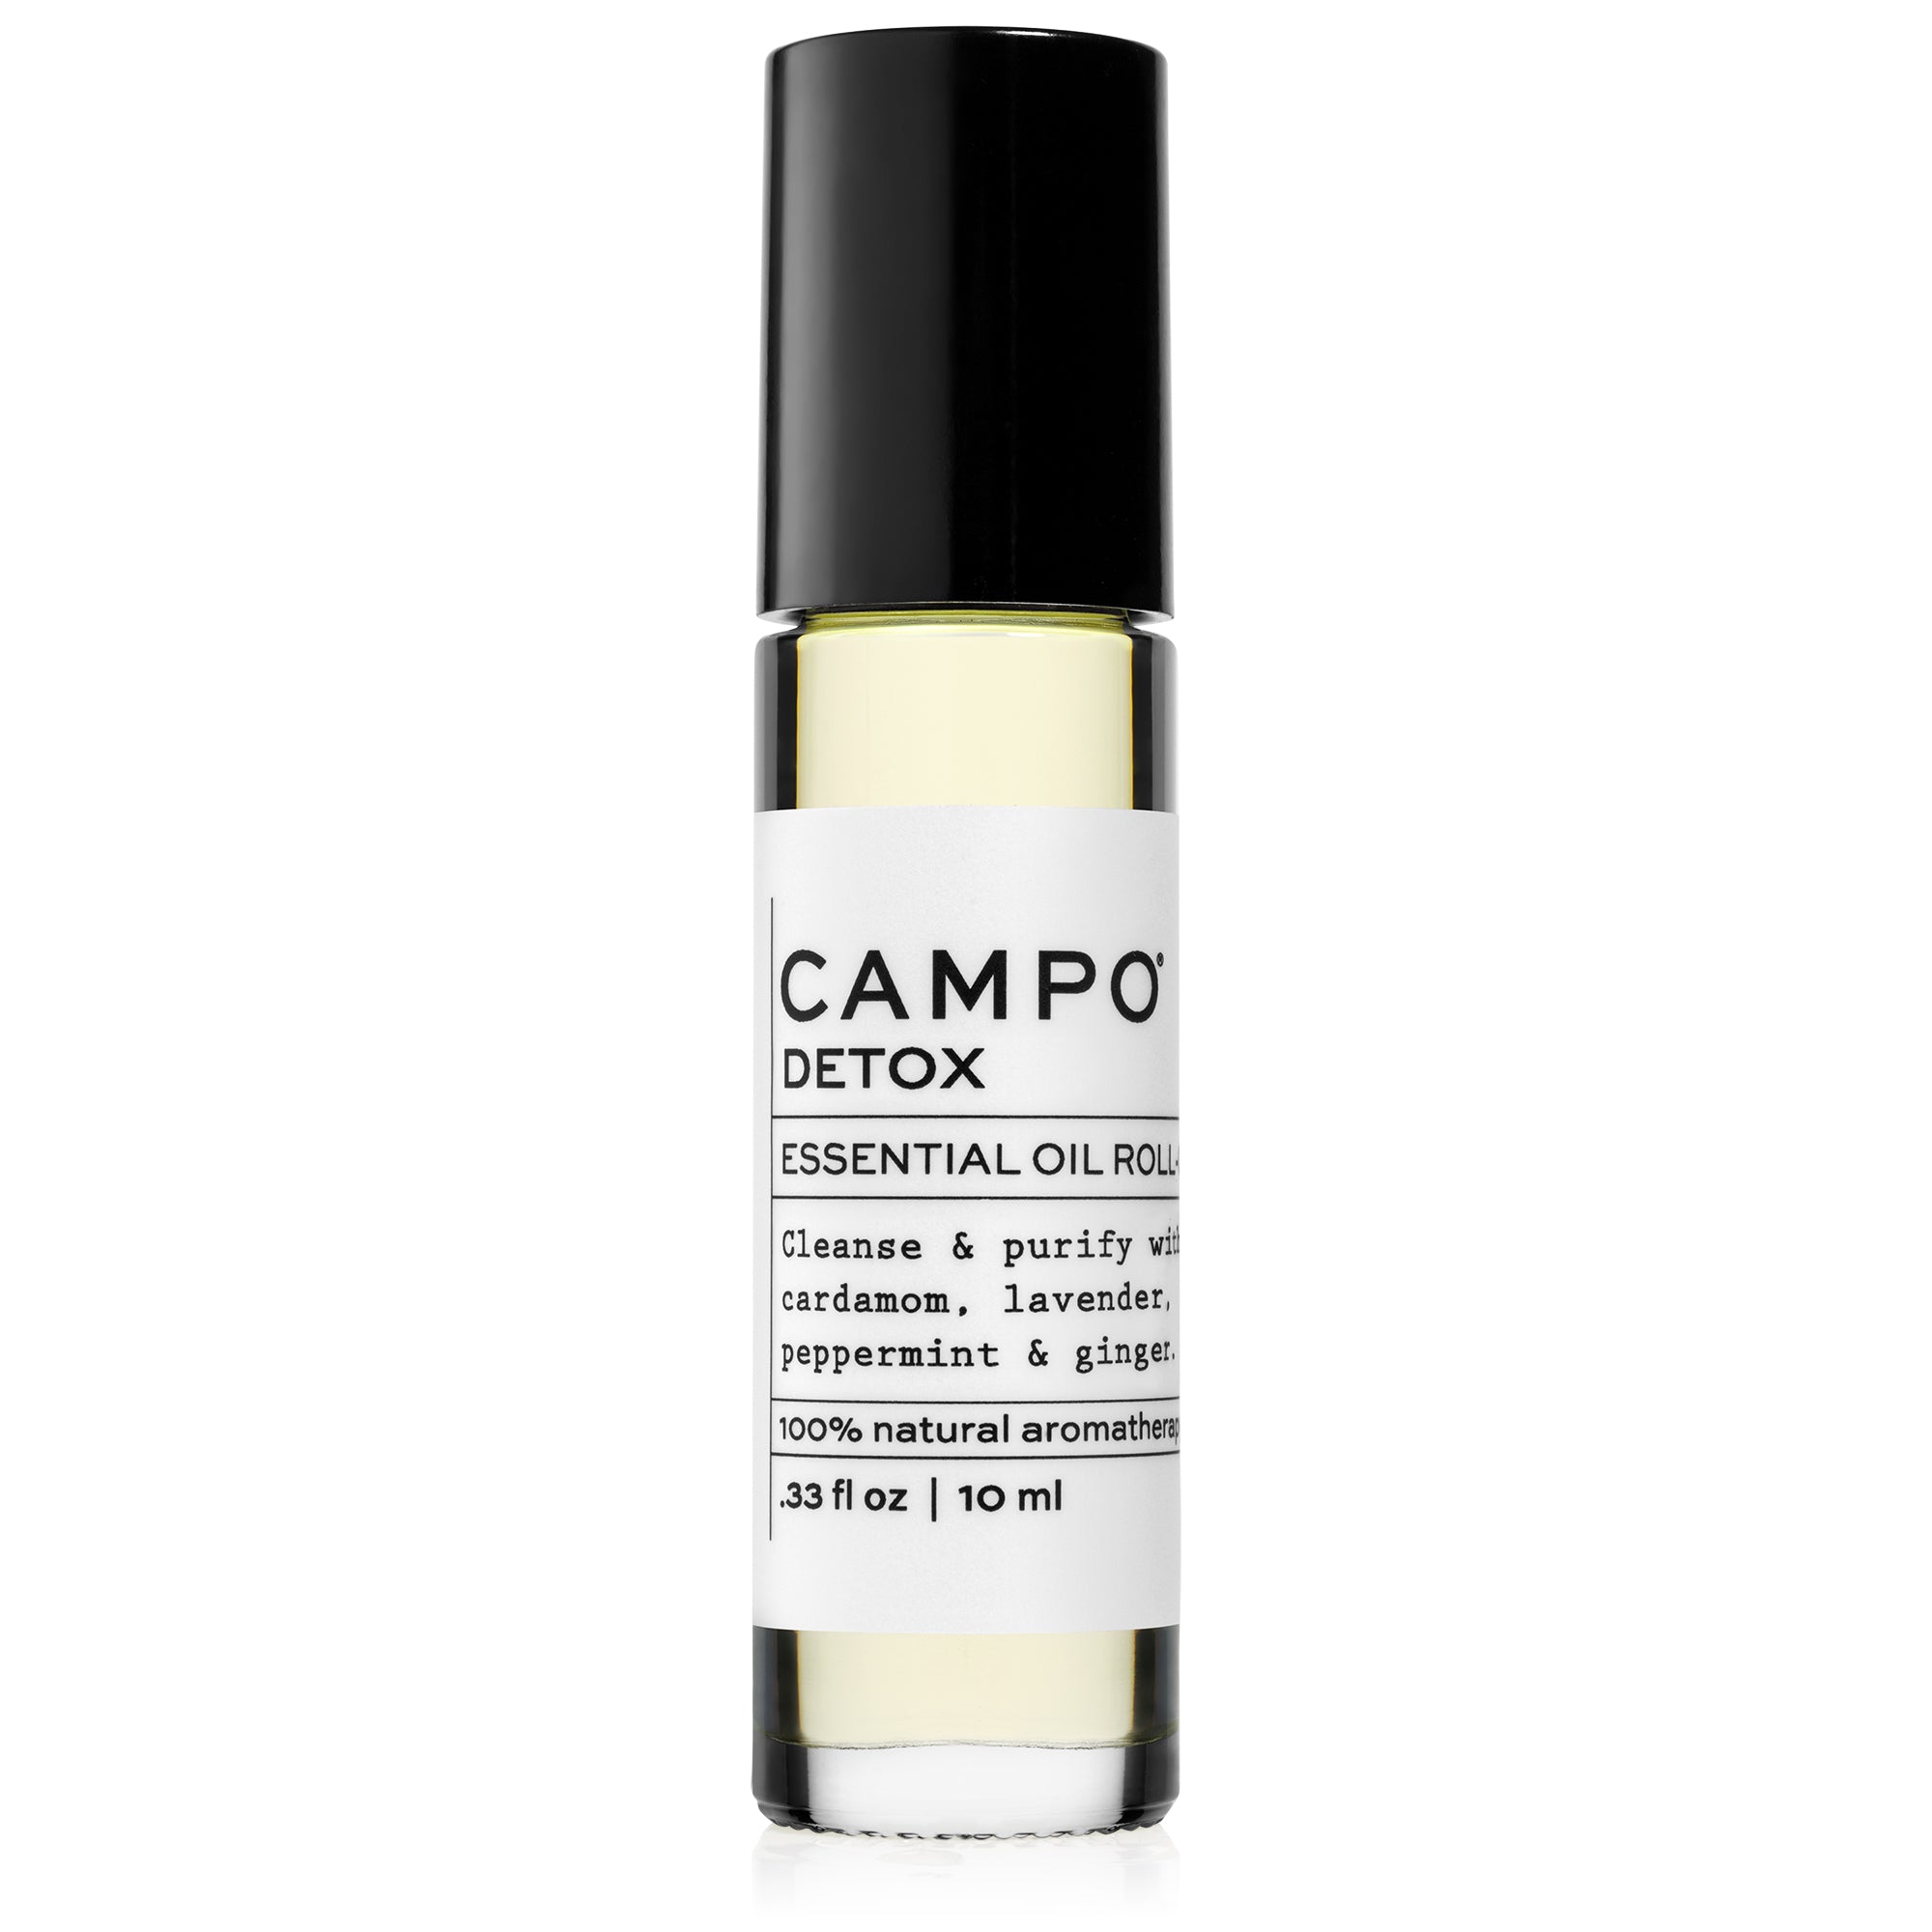 CAMPO Beauty 5 ml DETOX Blend Essential Oil Roll-On. Cleanse & purify your body naturally. Help eliminate toxins naturally with this 100% natural essential oil roll-on blend of Cardamom, Lavender, Peppermint & Ginger. Pre-blended with 100% natural beauty carrier oils. Jet set and ready to roll.